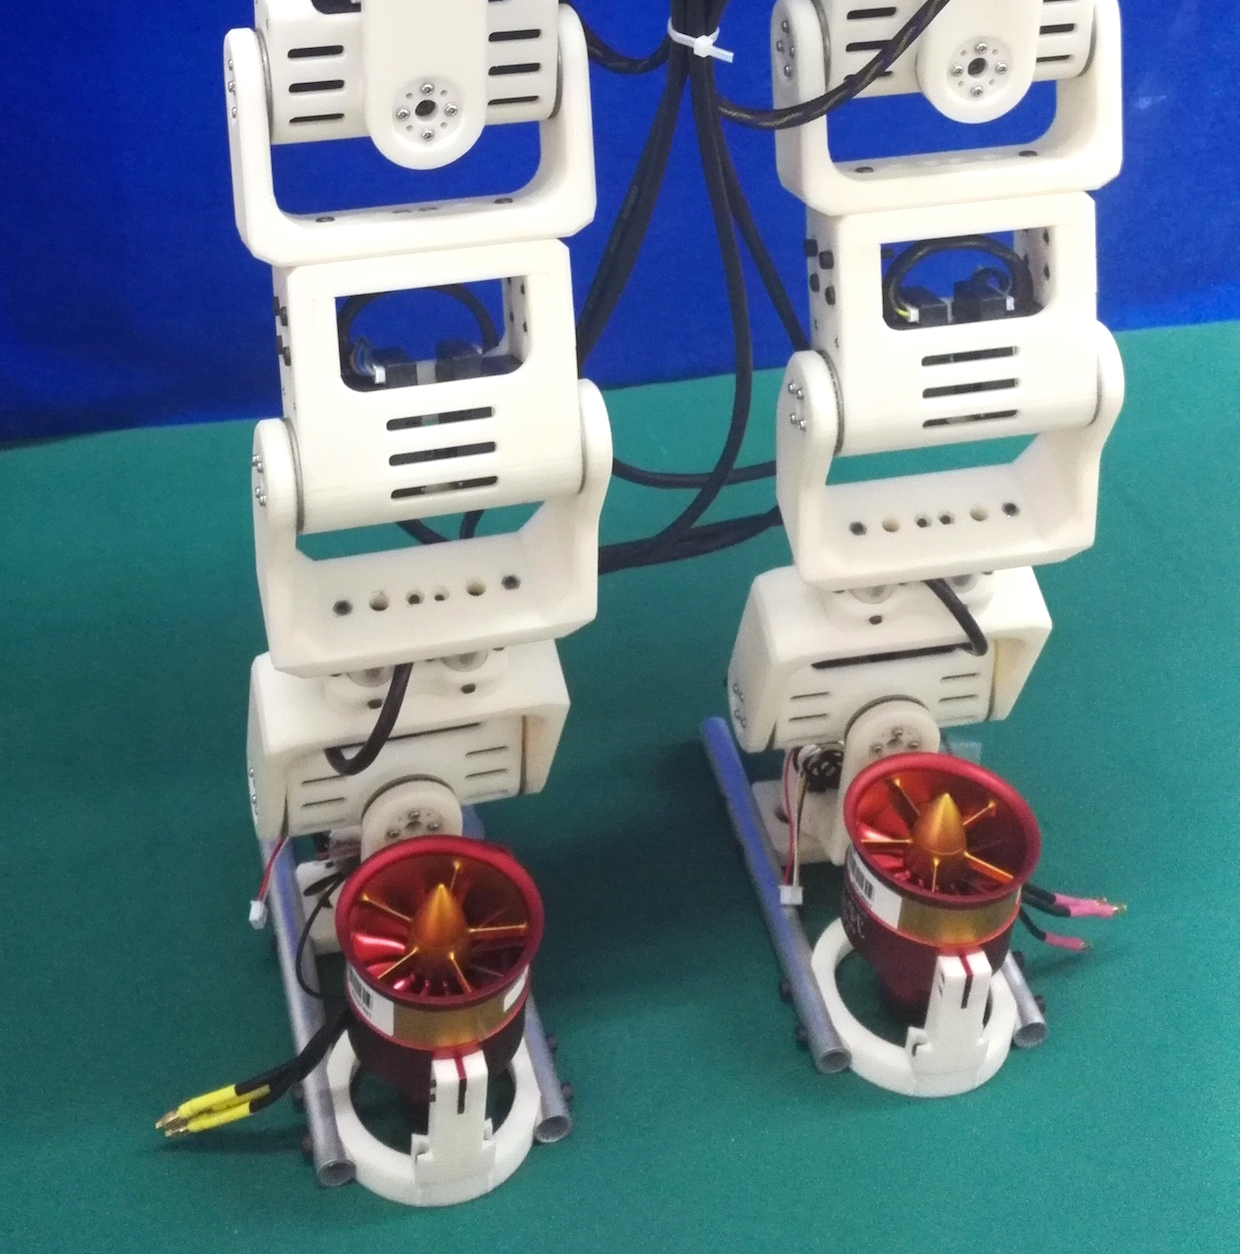 This Iron Man-Inspired Robot With Jet-Powered Feet Is A Master Of The Splits